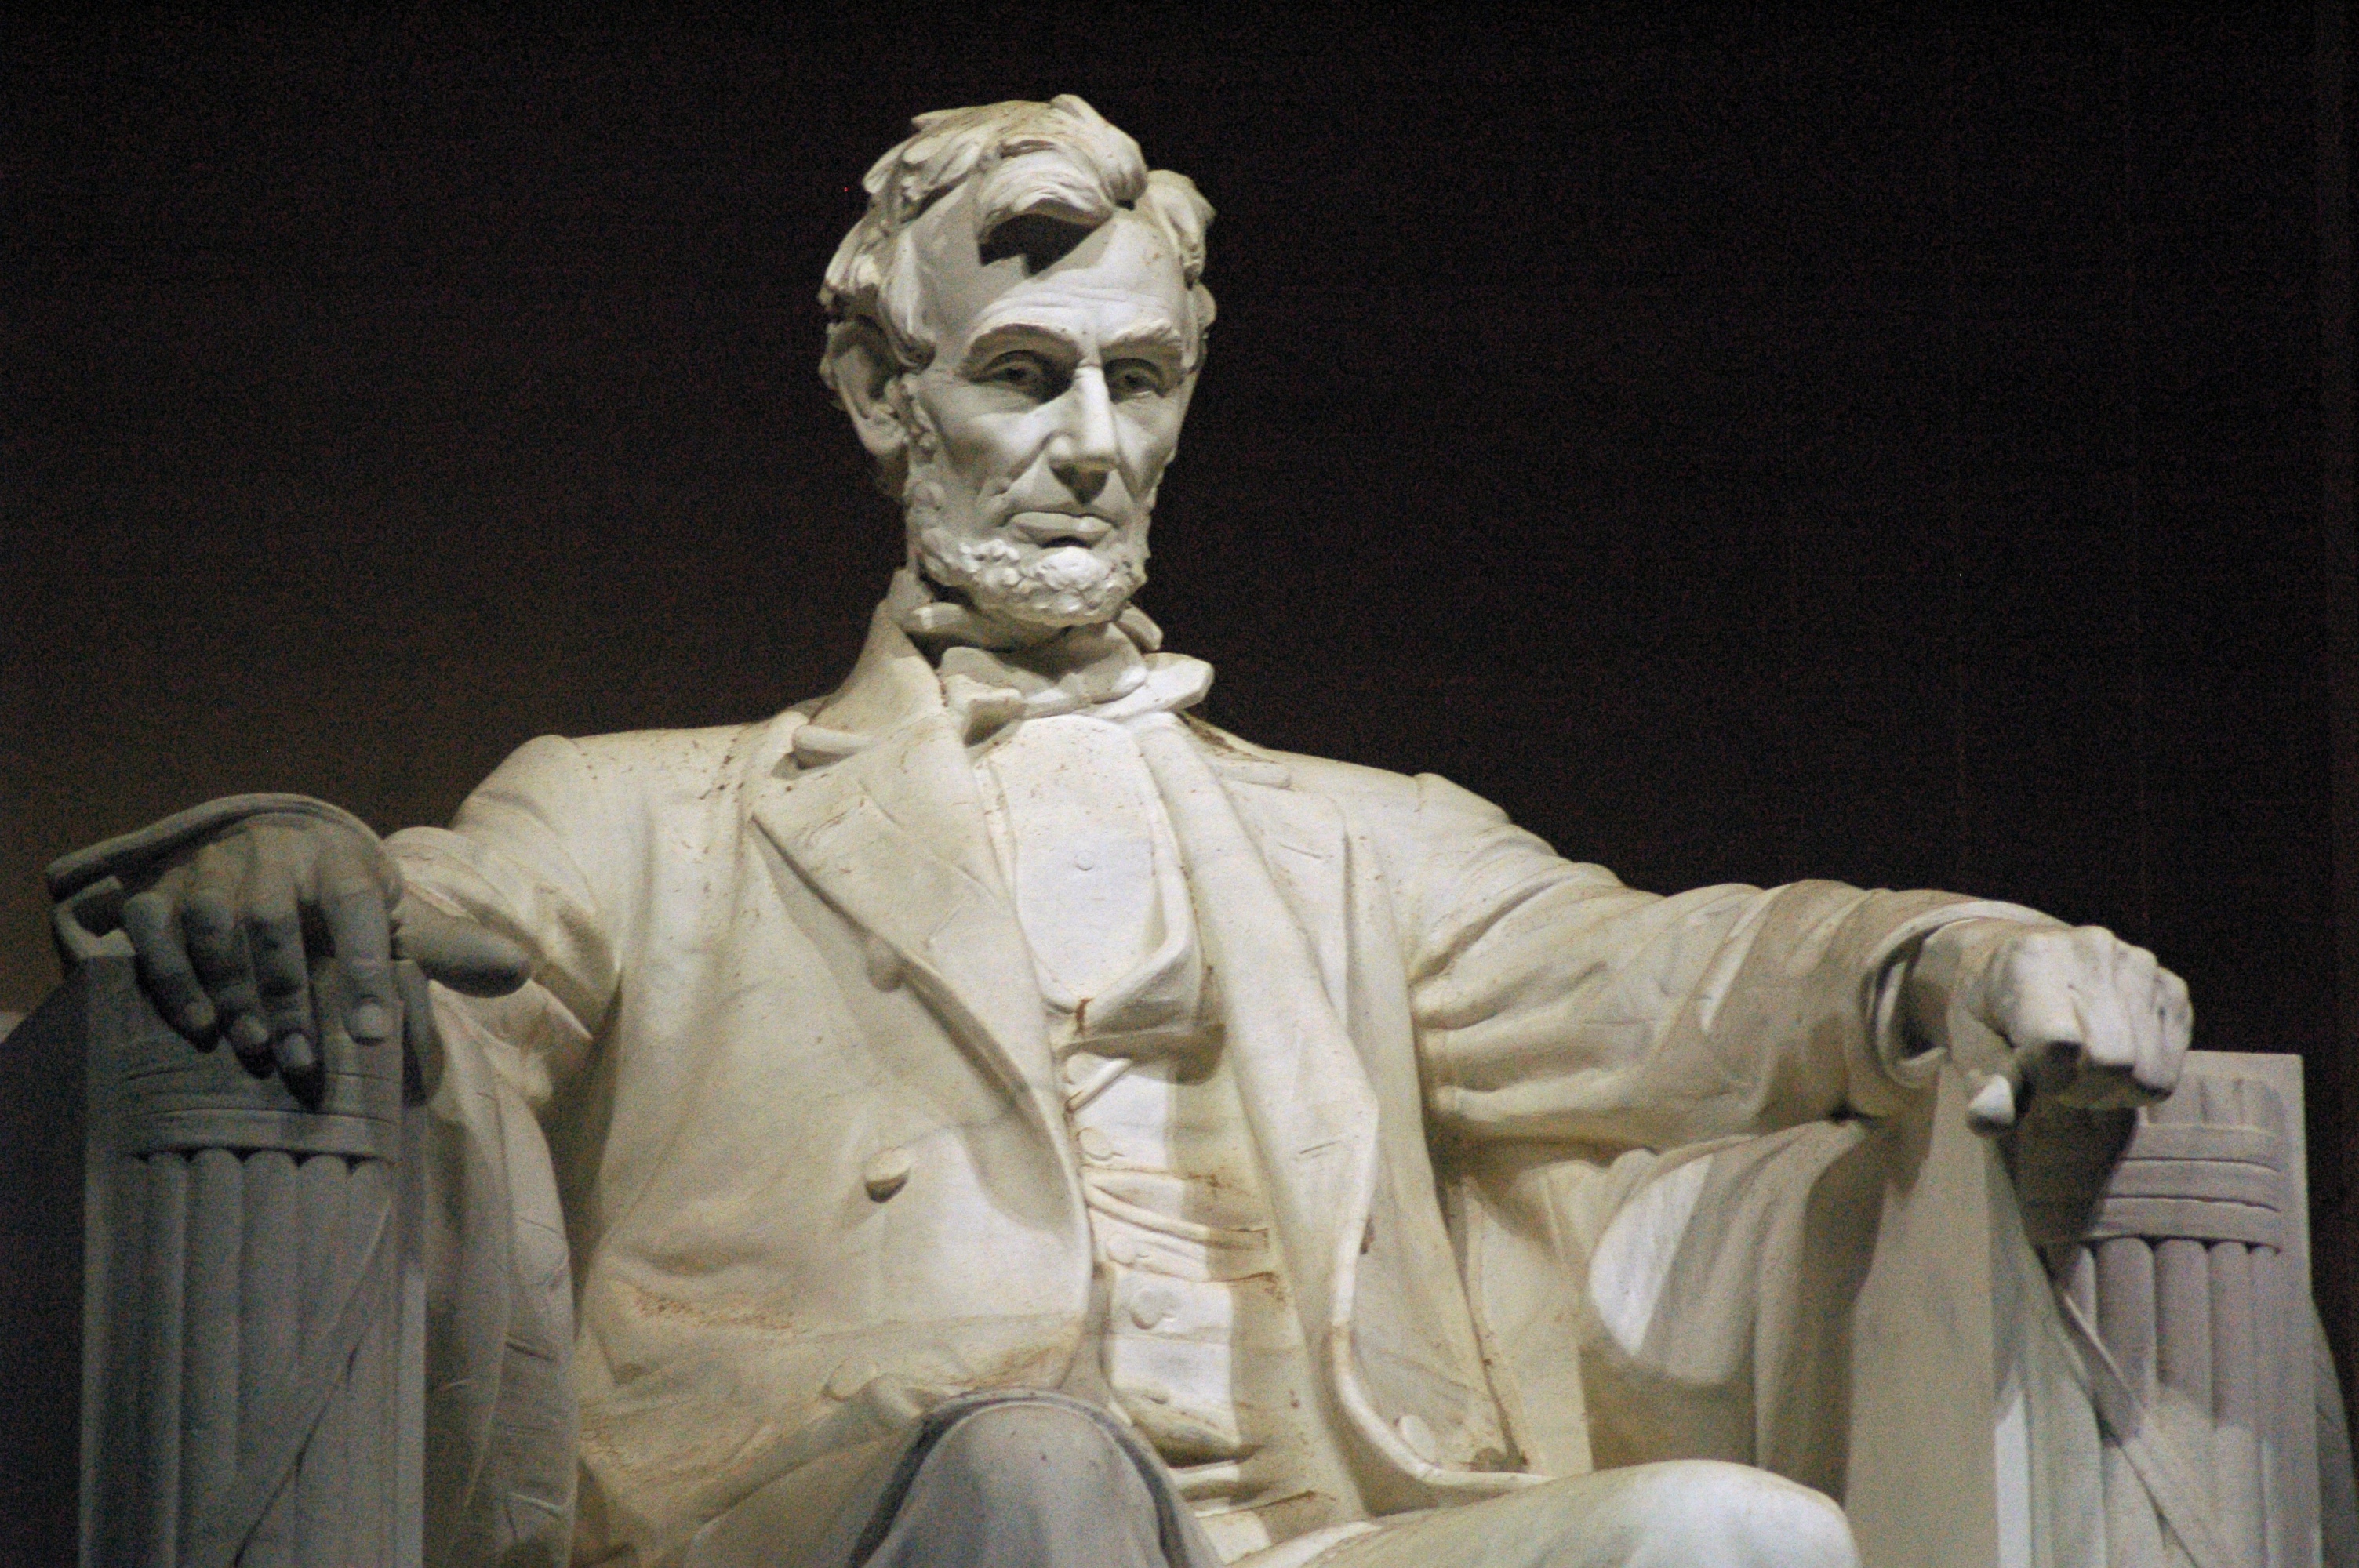 Statue of Abraham Lincoln sitting in contemplation in the central hall of the Lincoln Memorial in Washington, D.C.. The statue was carved by the Piccirilli Brothers under the supervision of the sculptor, Daniel Chester French, and took four years to complete. The statue, originally intended to be only 10 feet (3.0 m) tall, was, on further consideration, enlarged so that it finally stood 19 feet (5.8 m) tall from head to foot, the scale being such that if Lincoln were standing, he would be 28 feet (8.5 m) tall. Lincoln's arms rest on representations of Roman fasces, a subtle touch that associates the statue with the Augustan (and imperial) theme (obelisk and funerary monuments) of the Washington Mall. The statue is discretely bordered by two pilasters, one on each side. Between these pilasters, and above Lincoln's head, is engraved an epitaph of Lincoln by Royal Cortissoz.